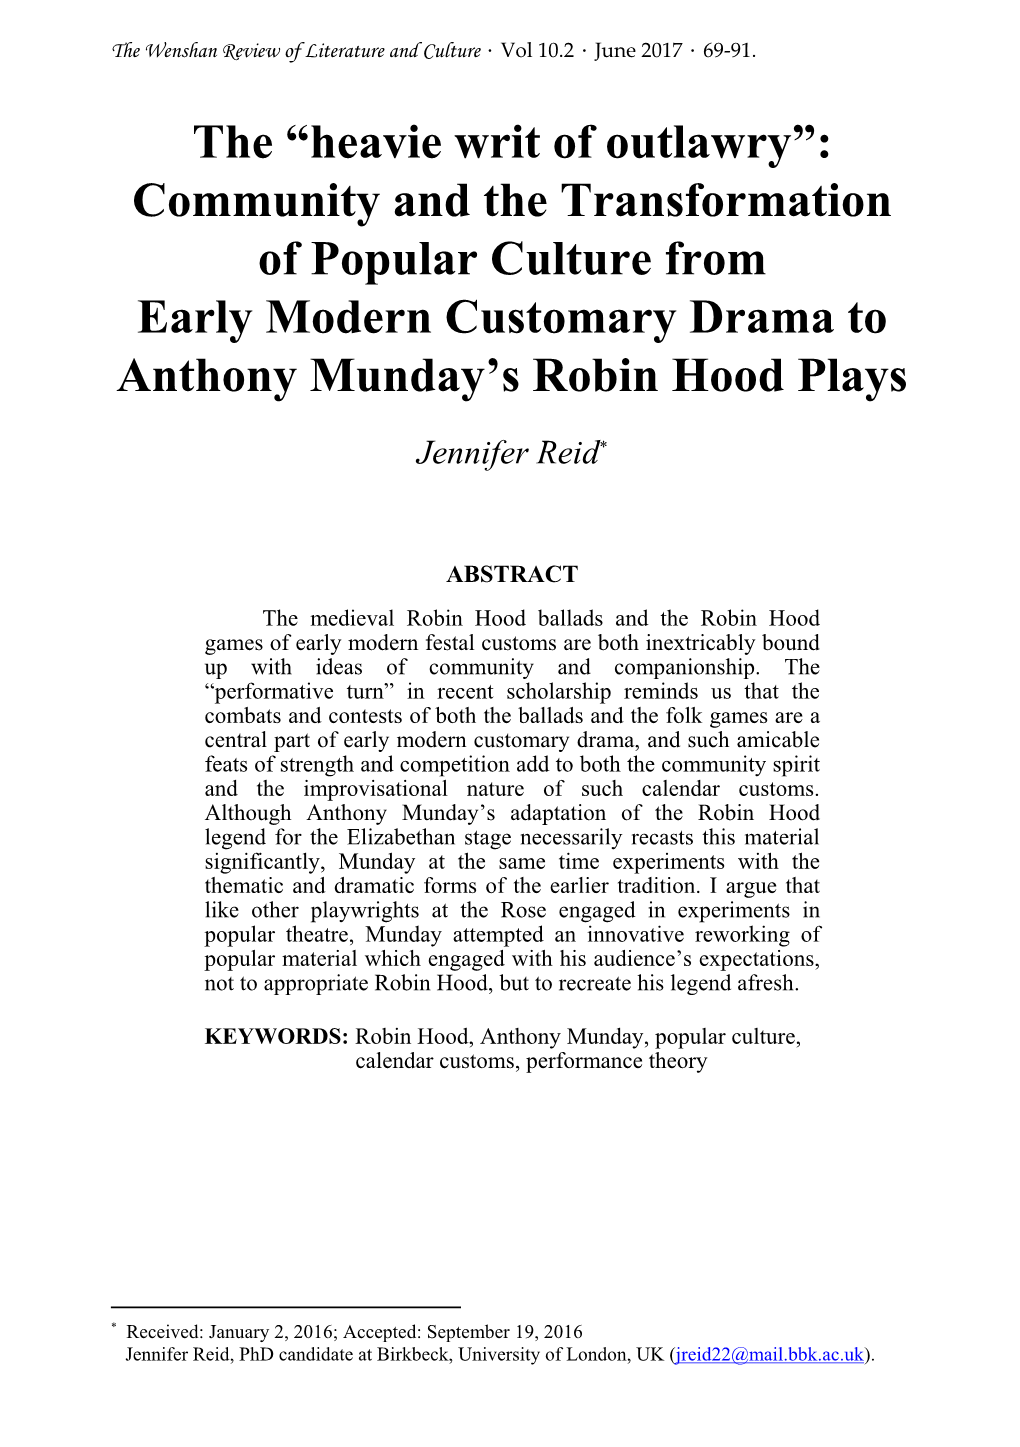 Community and the Transformation of Popular Culture from Early Modern Customary Drama to Anthony Munday’S Robin Hood Plays